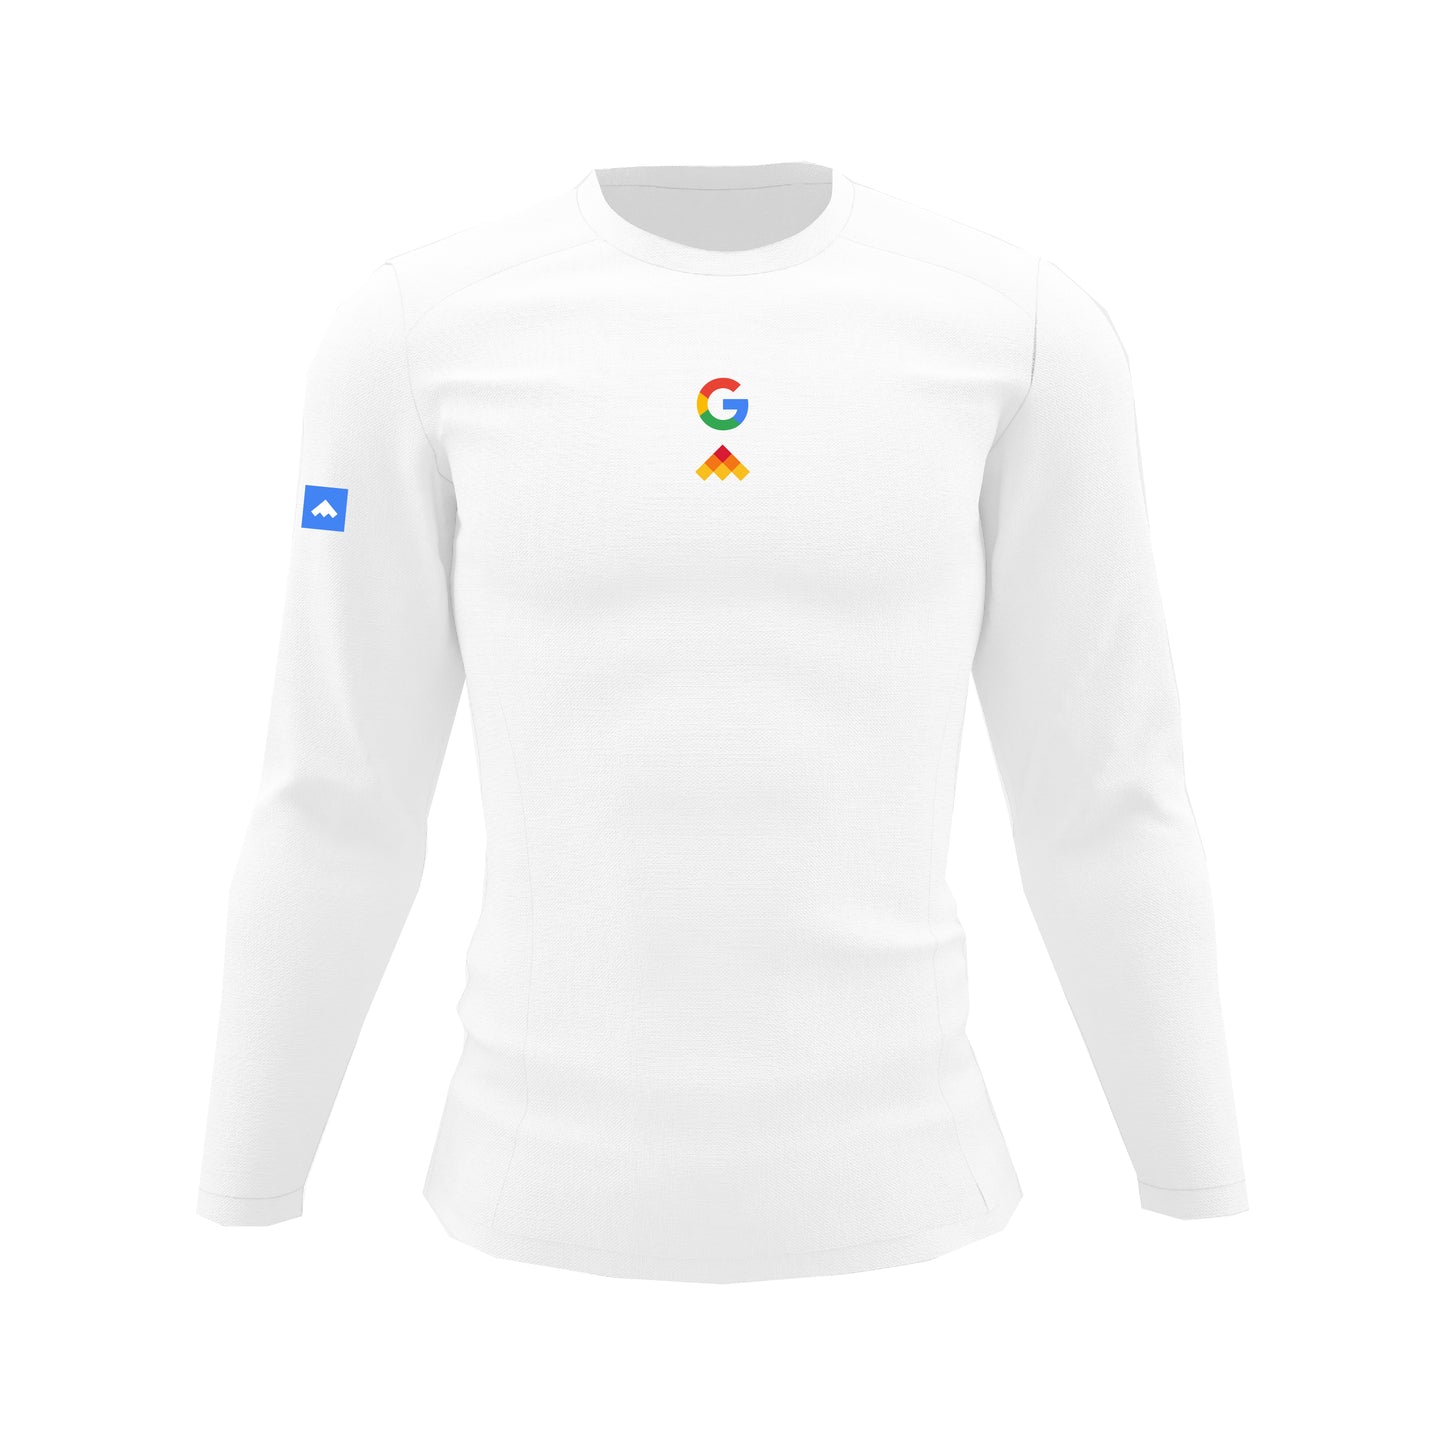 Google - Sky Force ™ Sweatshirt by Athletic Forces -  Model 2